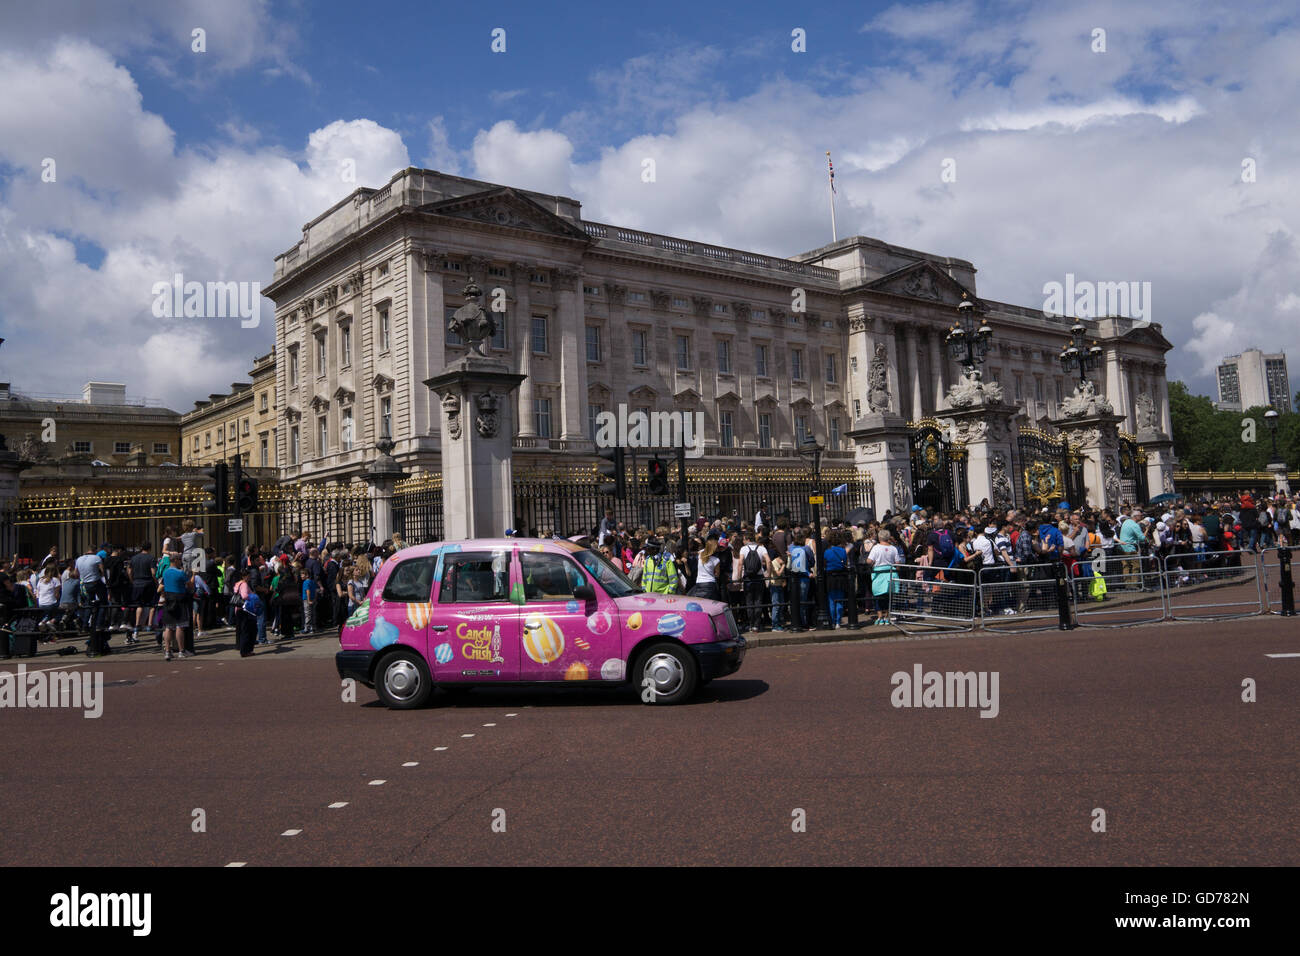 Pink Taxi in the foreground of Buckingham Palace during Changing of the Guard. Stock Photo